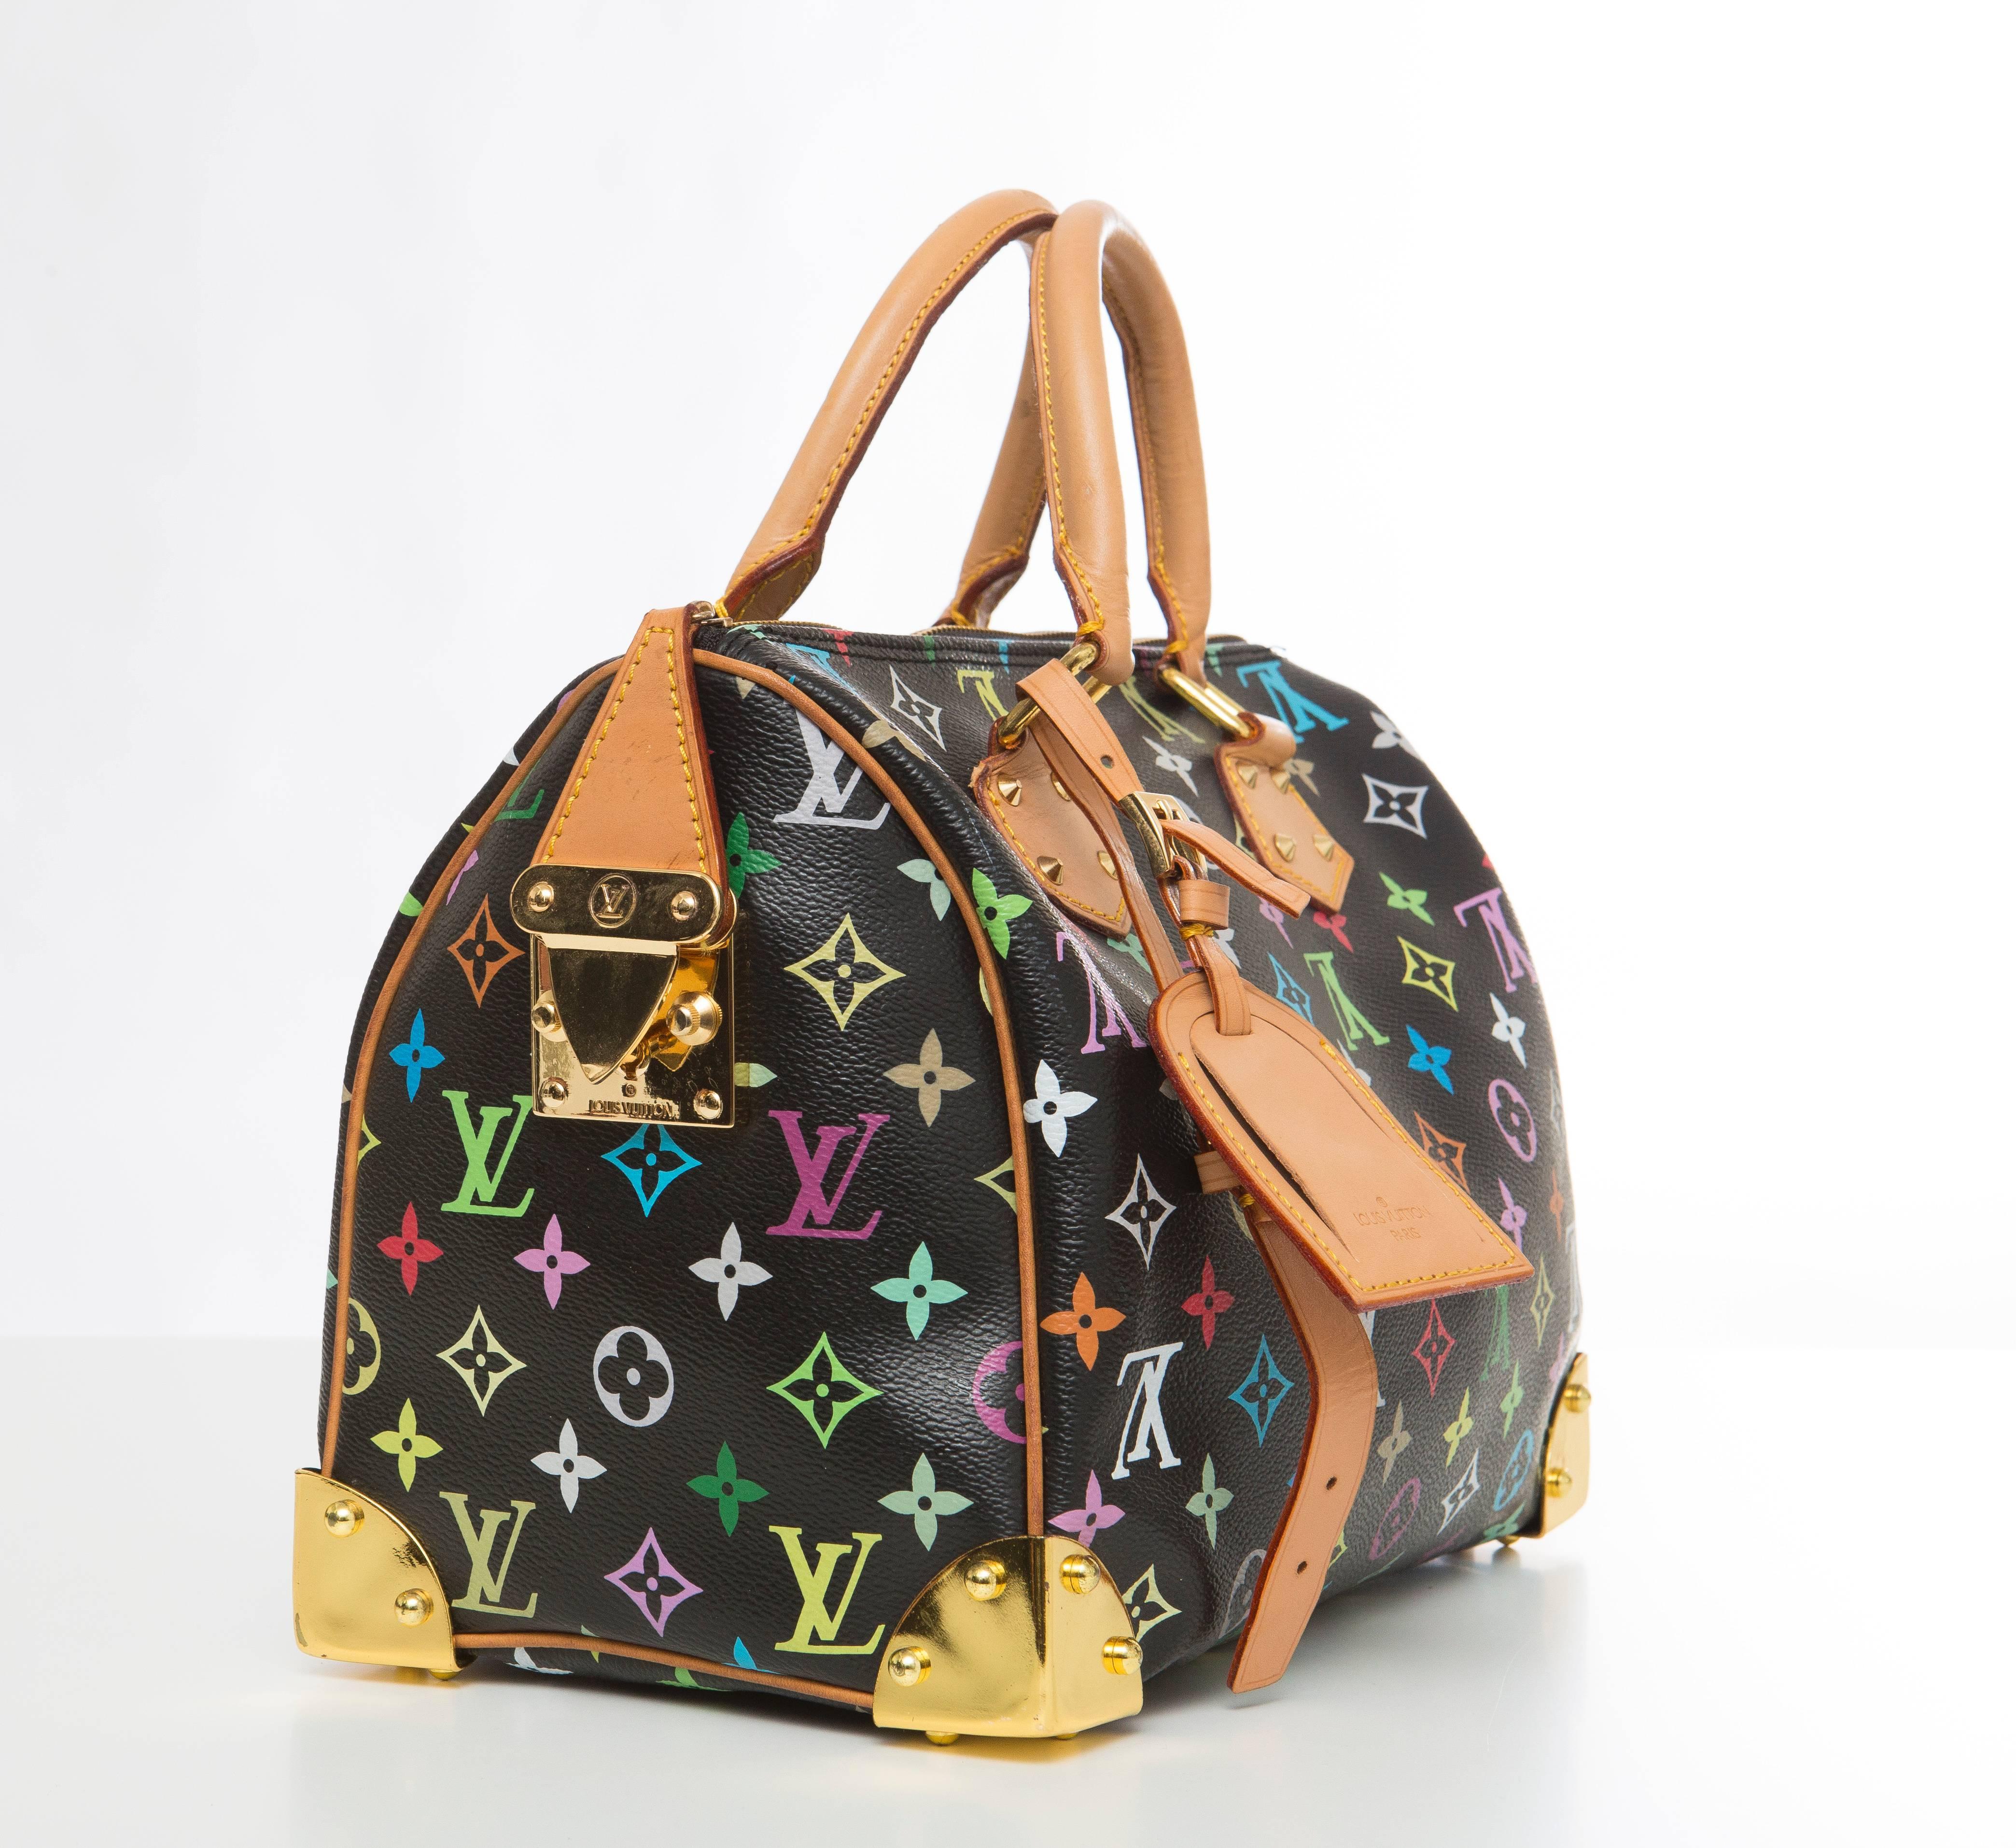 Louis Vuitton Limited Edition Takashi Murakami Collection Speedy 30 Hand Bag In Excellent Condition For Sale In Cincinnati, OH